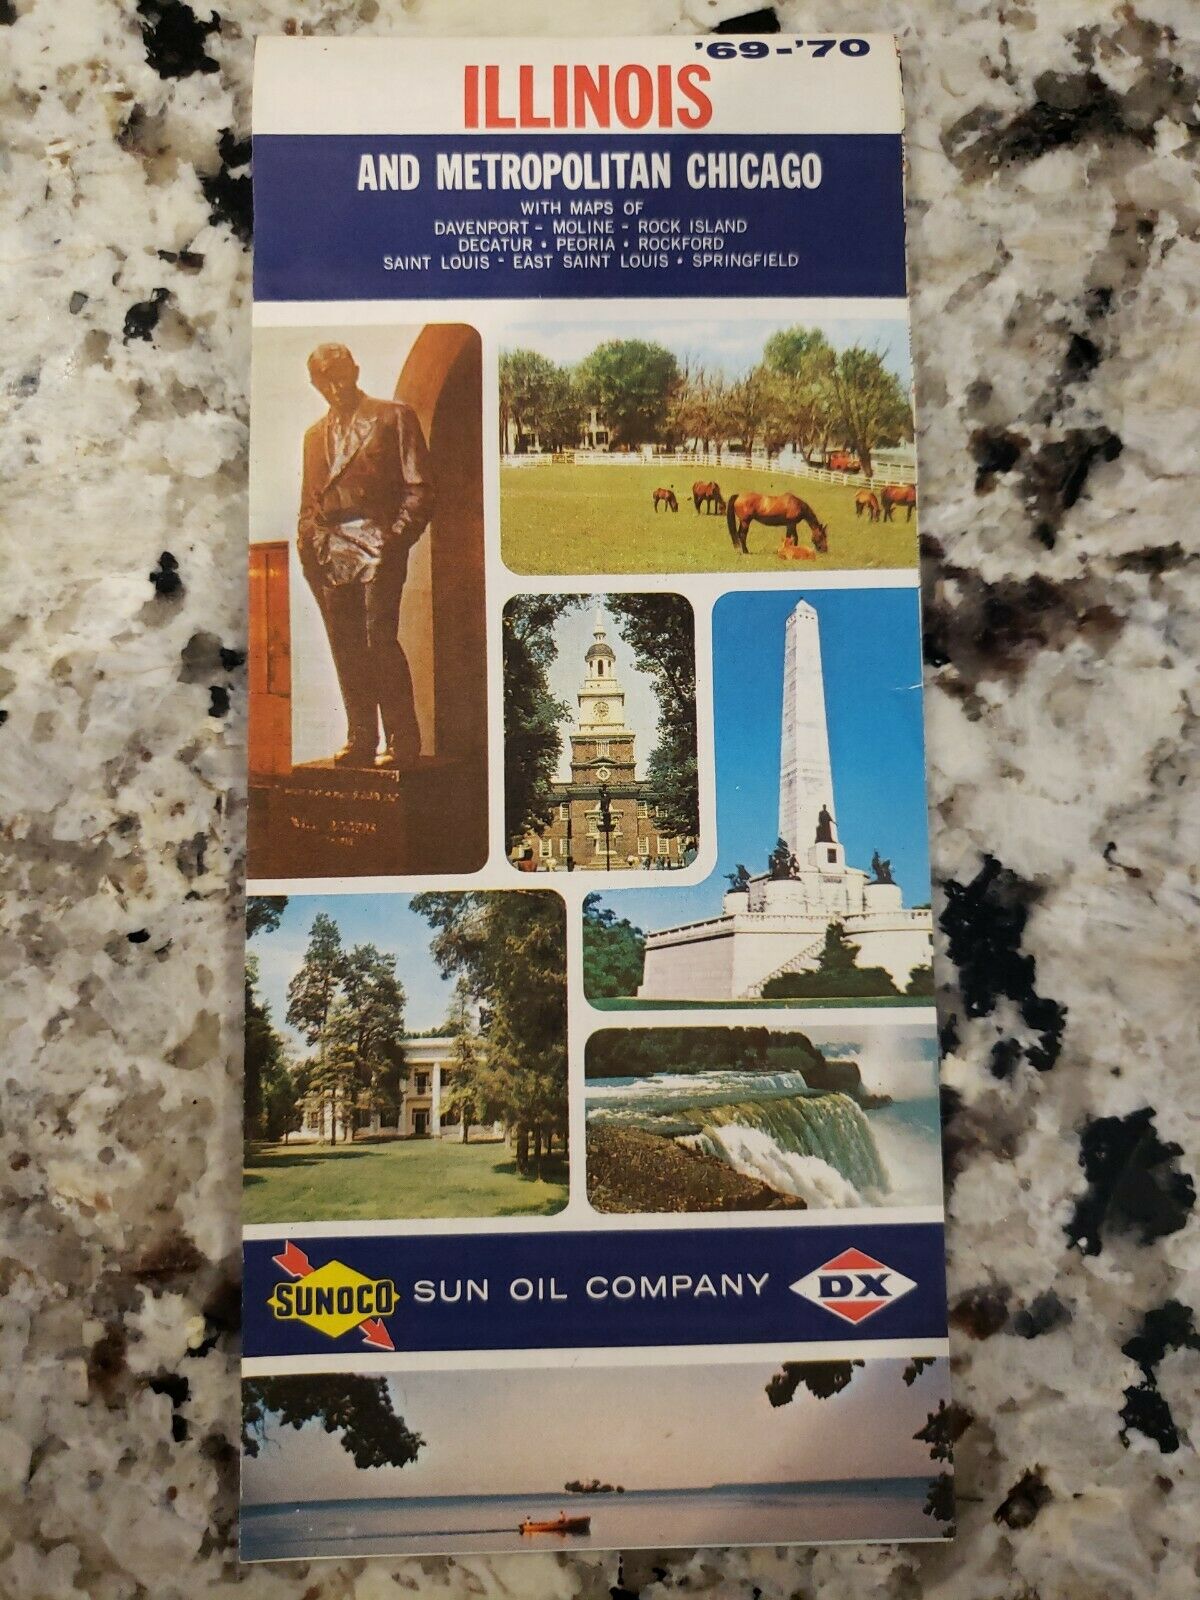 Rare Vintage 1969 Sunoco Dx Illinois - Oil Gas Service Station Travel Road Map